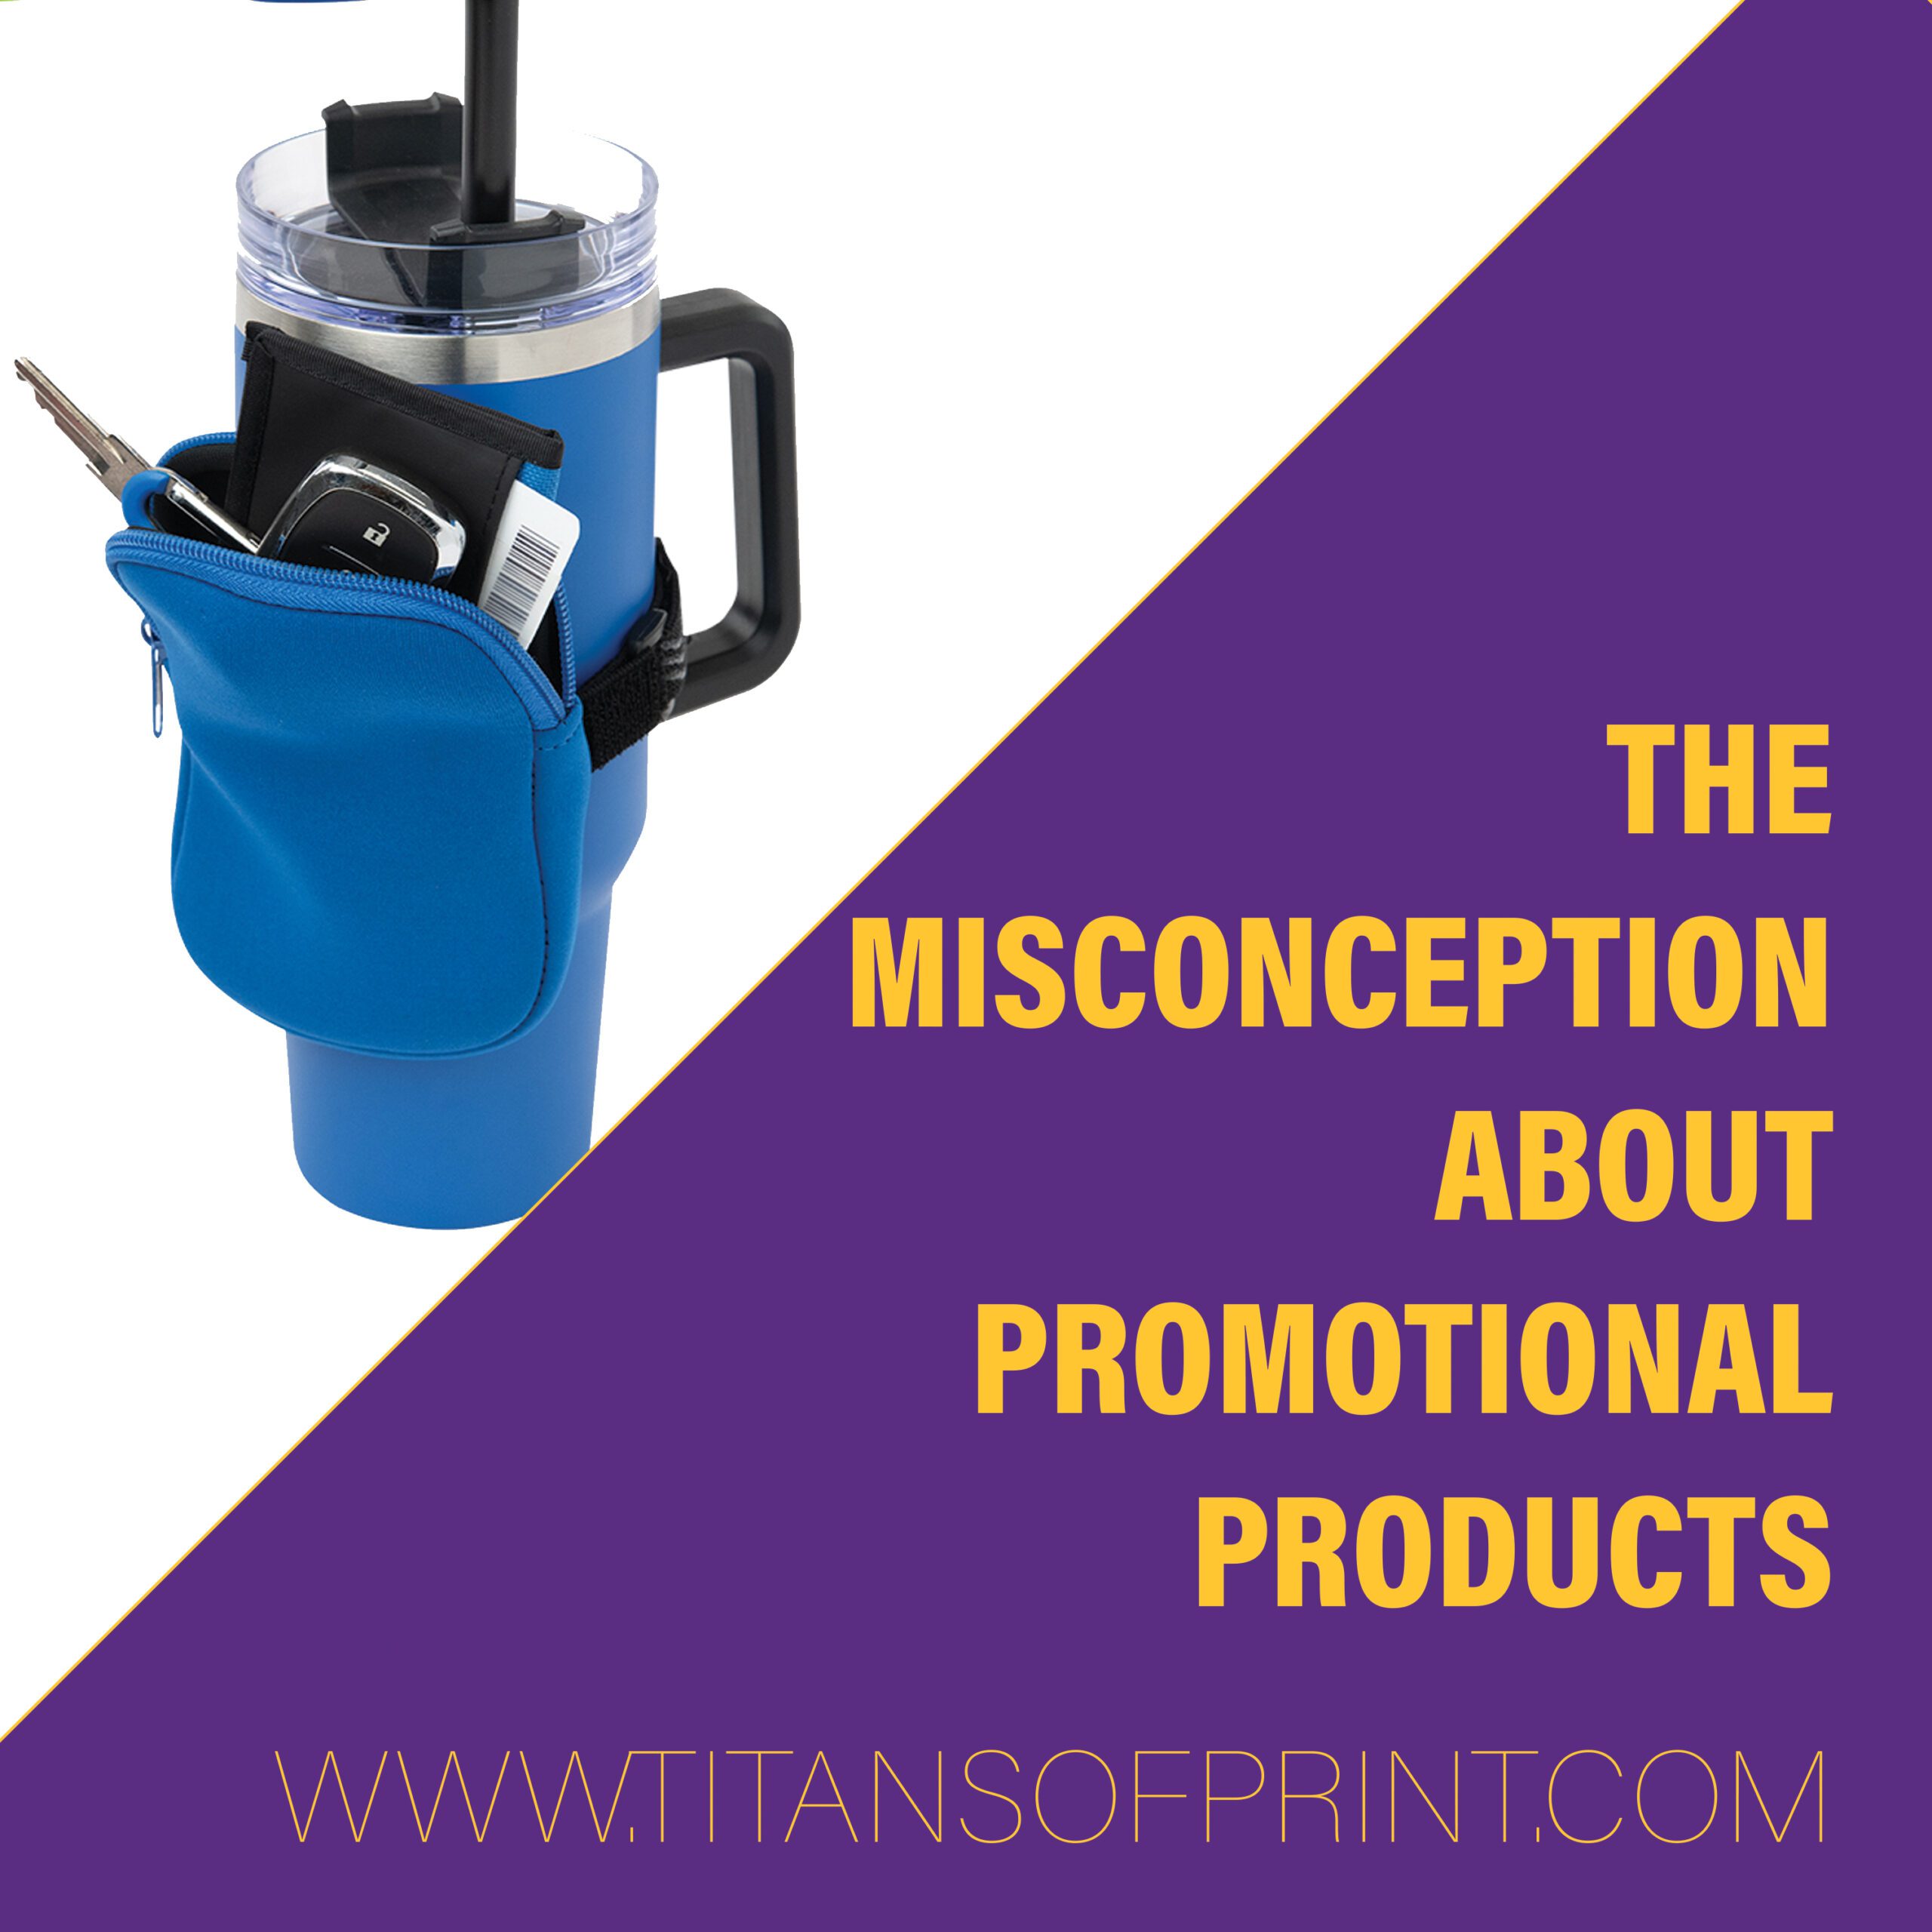 The Misconception About Promotional Products